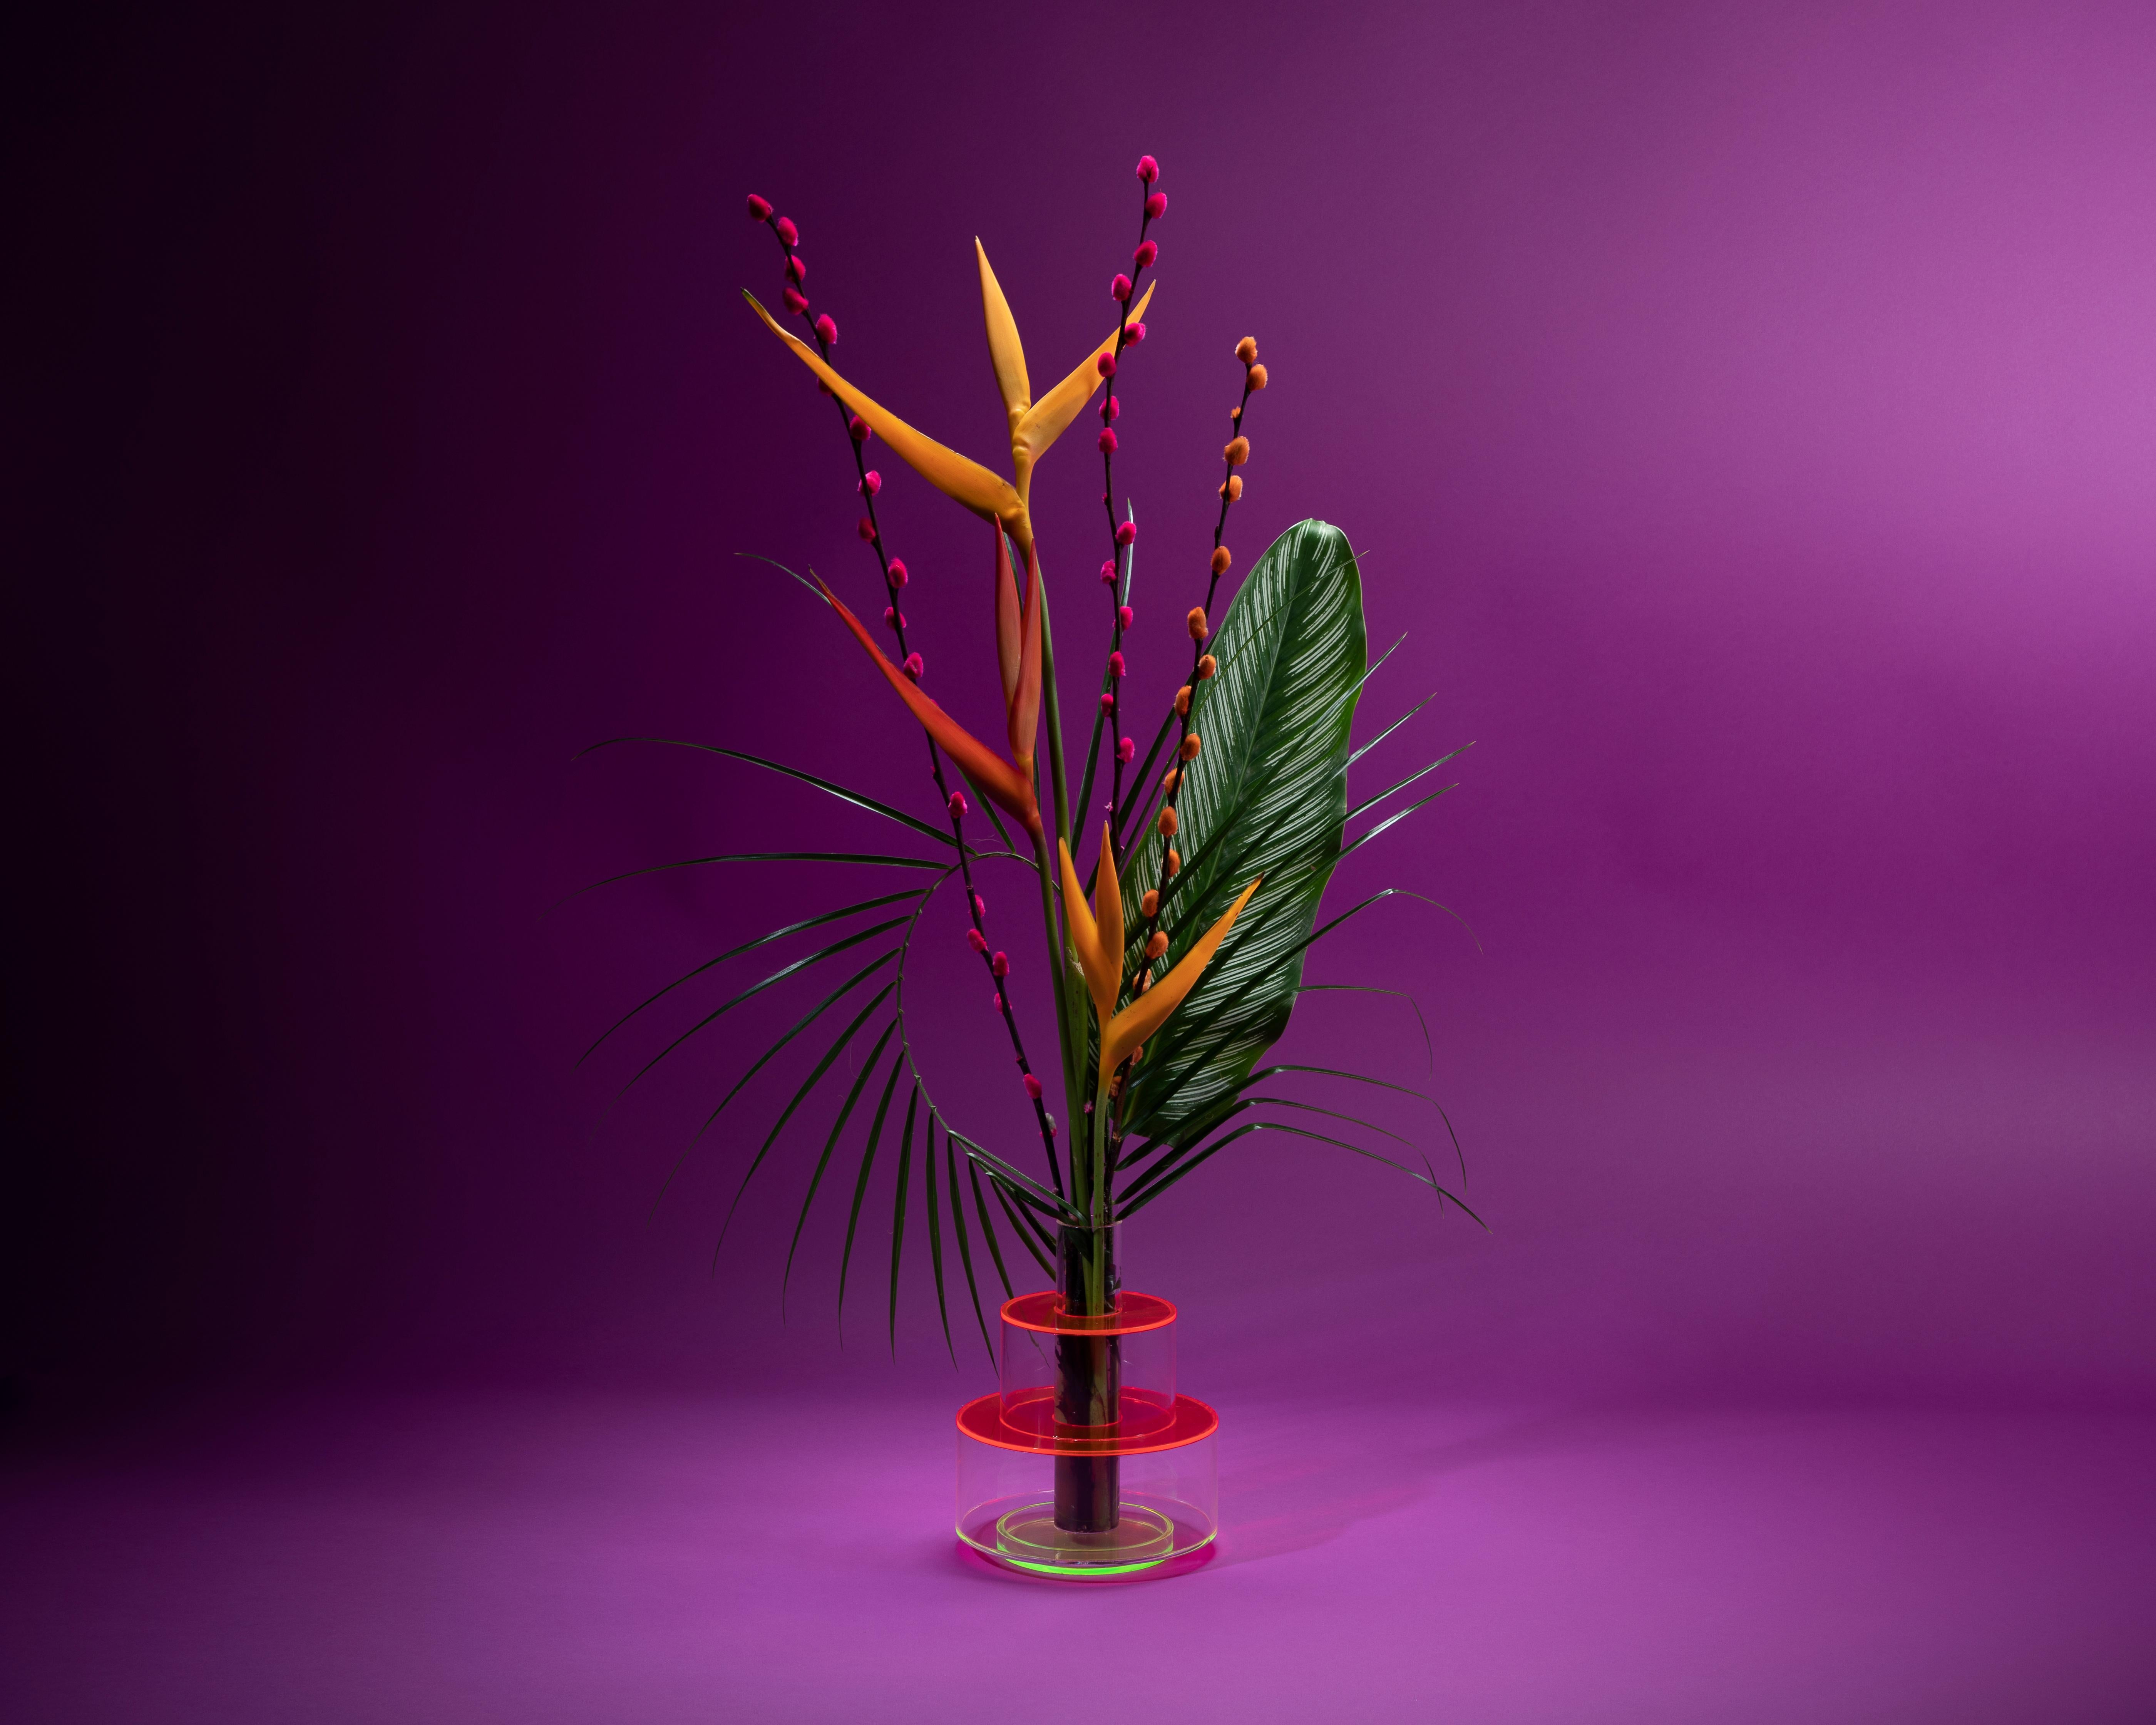 The Transparent series of vases by Another Human is an exploration of color and geometry through the use of acrylic, a material employed by the designer often due to the flexibility in application. Reminiscent of the shapes and colors prevalent in